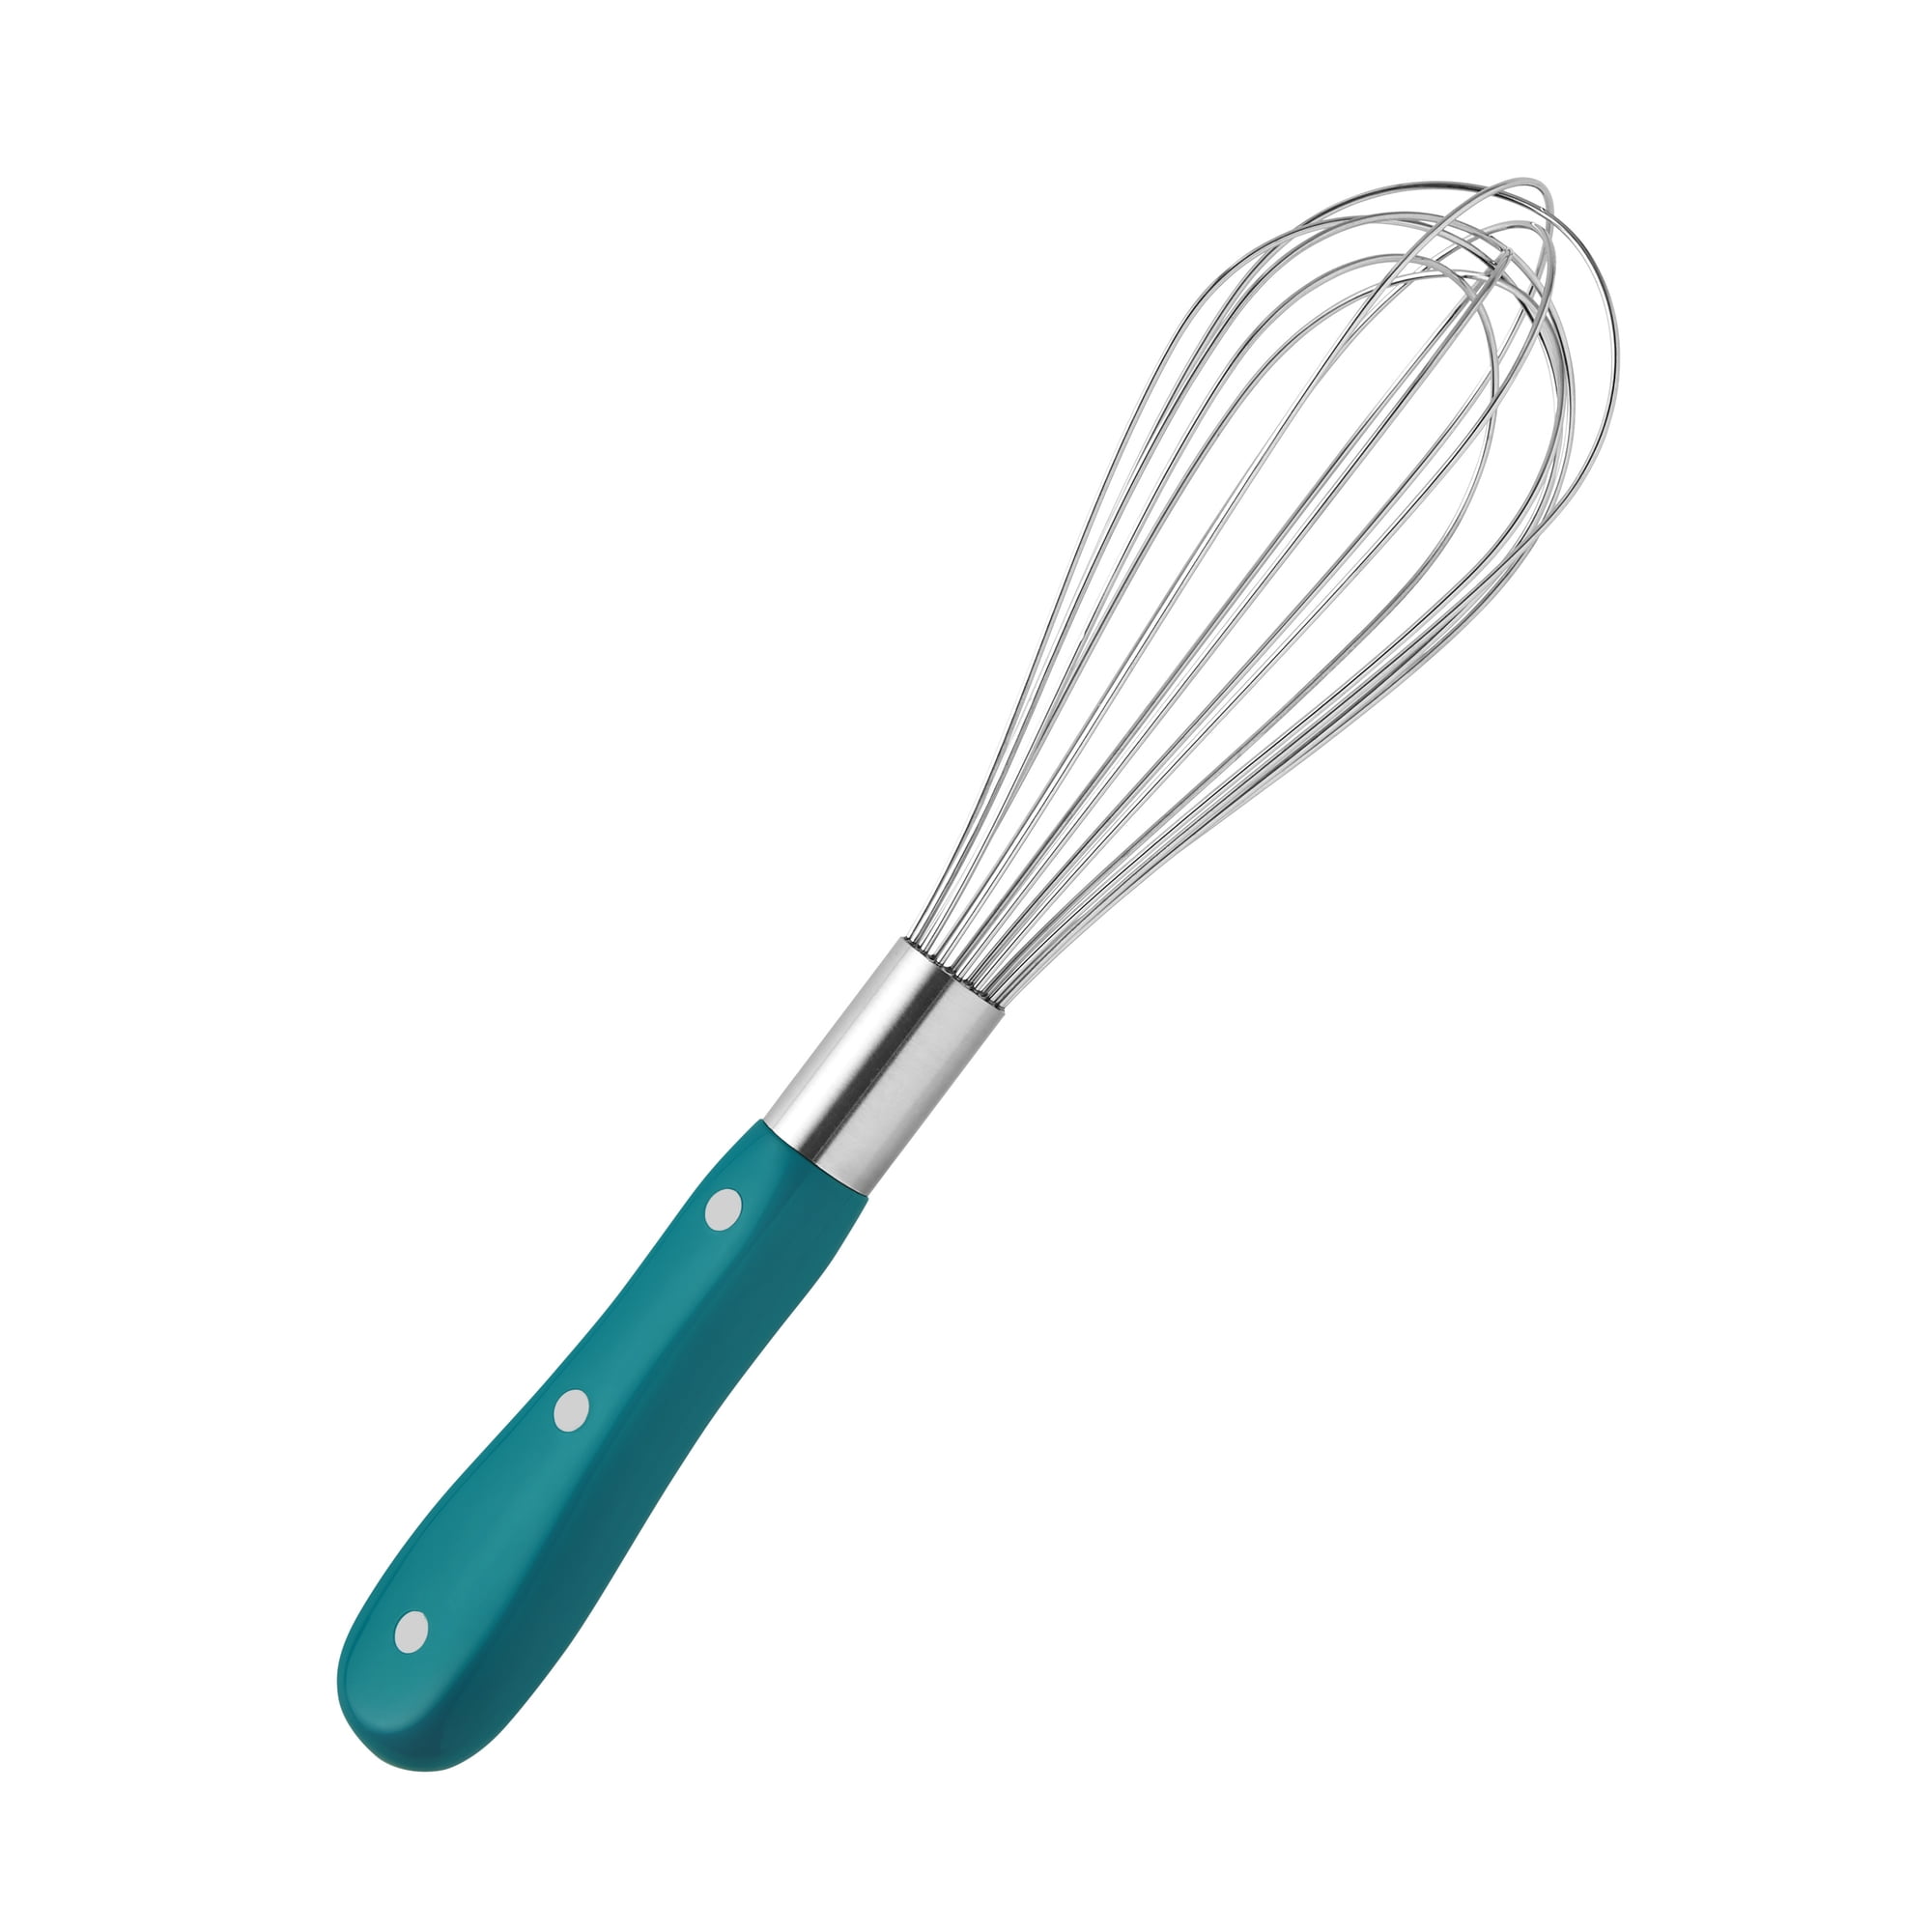 Vogue Heavy Balloon Whisk 505mm - M968 - Buy Online at Nisbets